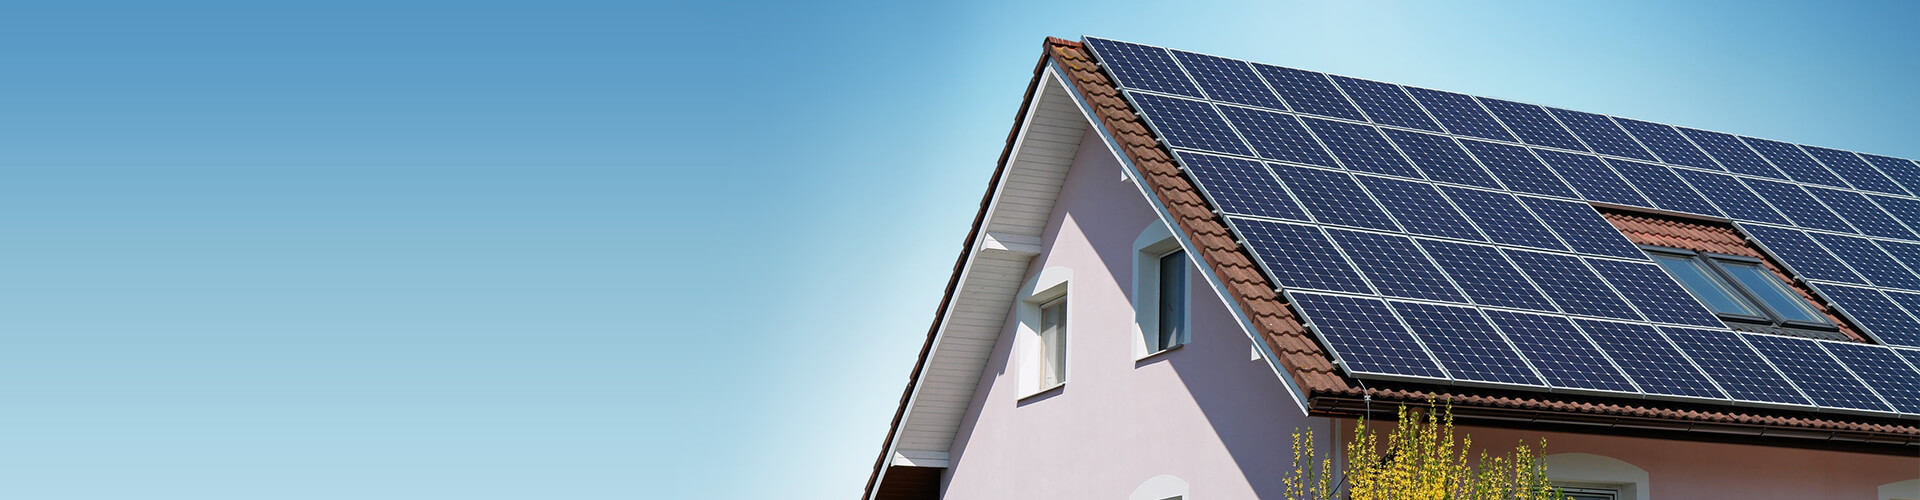 Do solar panels really add value to your property? What about the upfront cost?